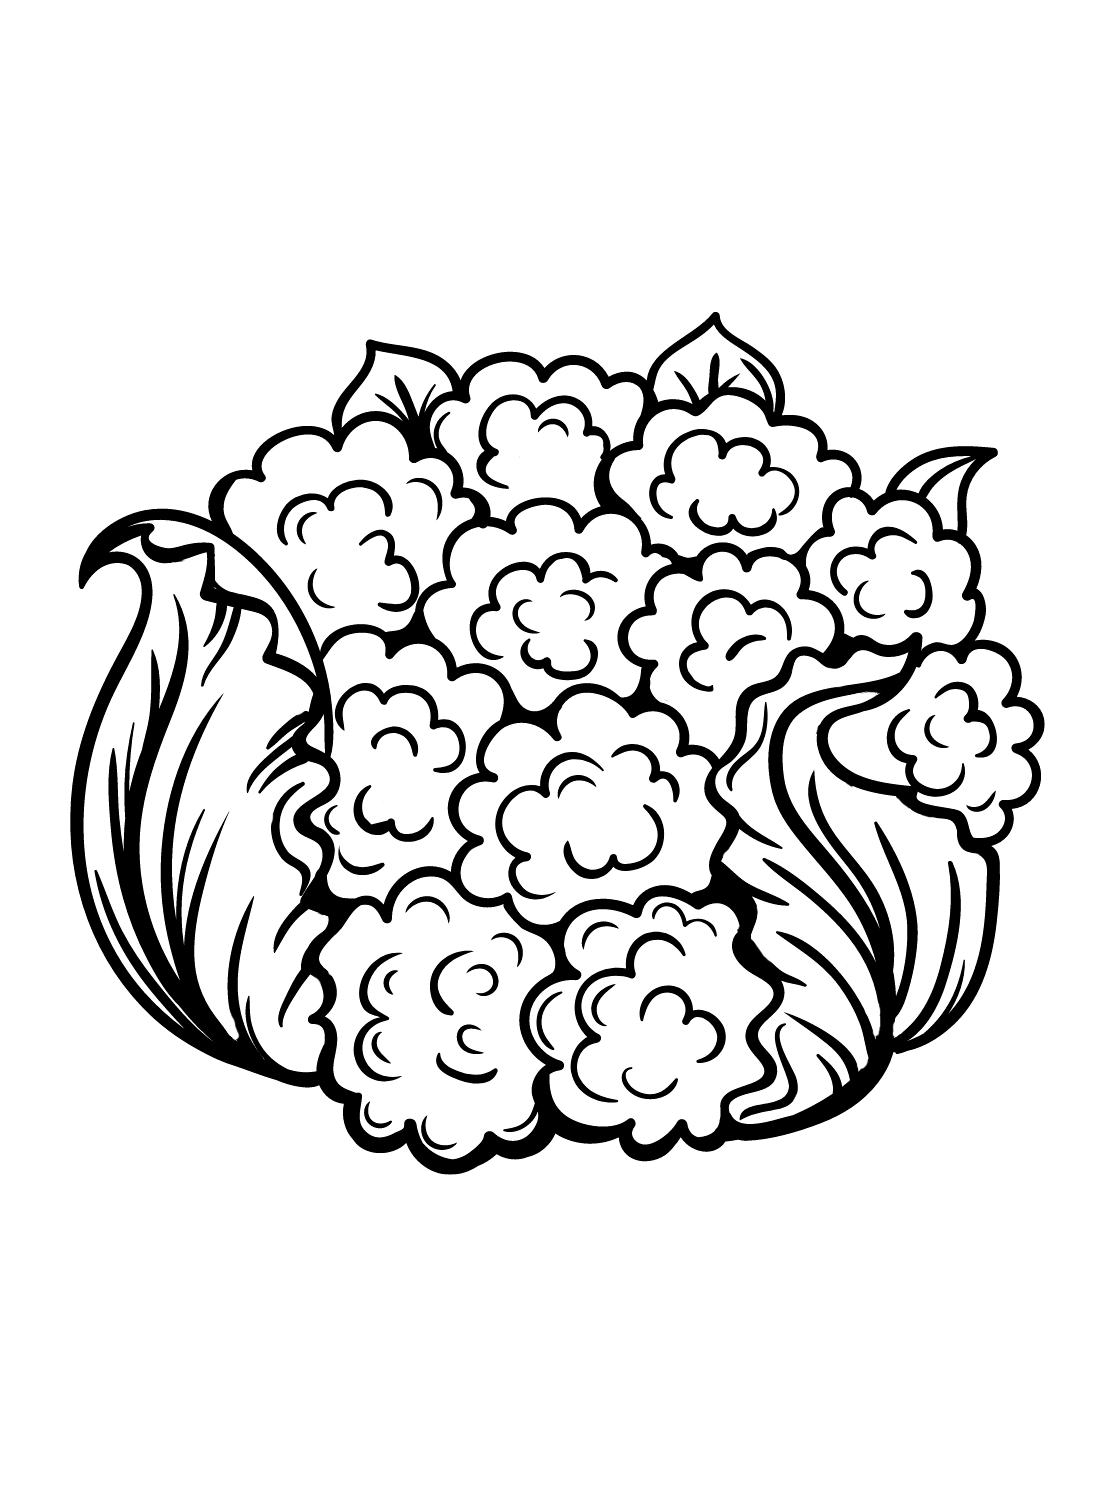 Cauliflower coloring pages printable for free download